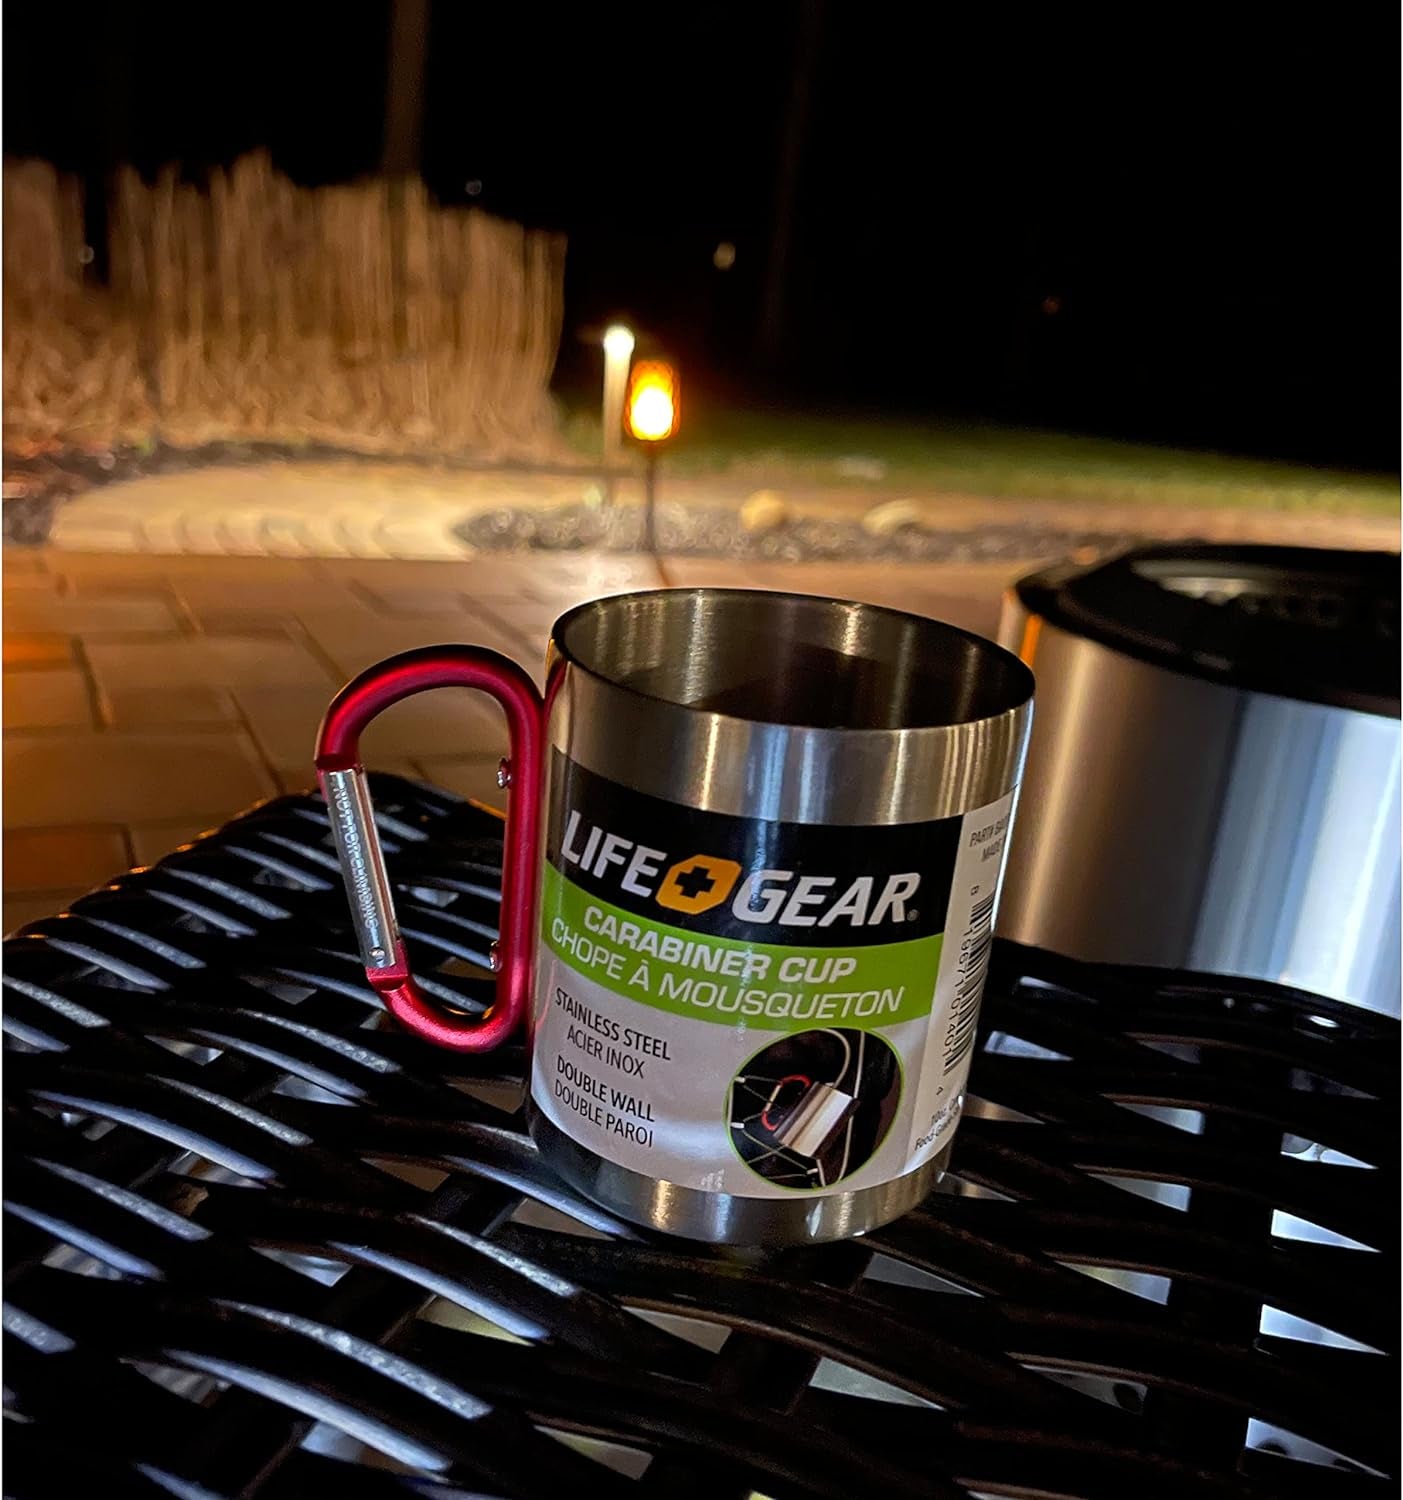 Life Gear Stainless Steel Double Walled Mug with Carabiner Handle - Portable Rockclimbing, Hiking, Backpacking or Camping Travel Cup 10 Oz